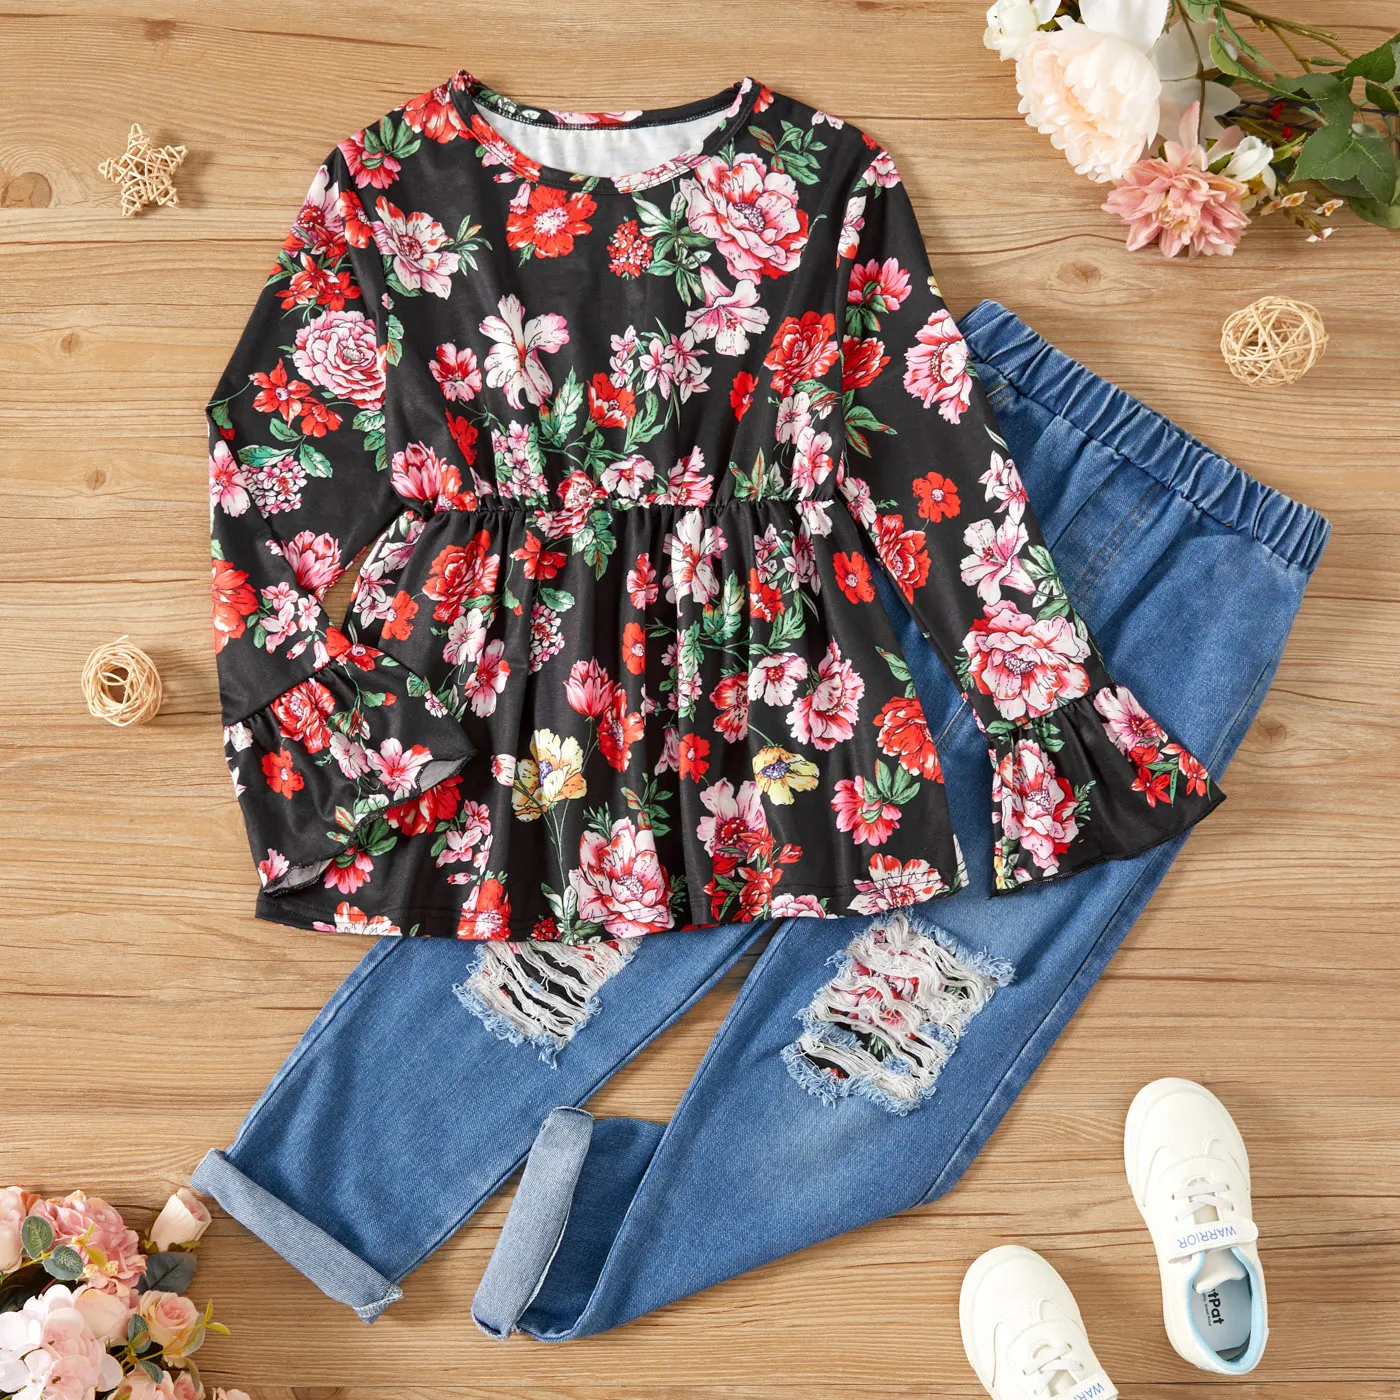 

2-piece Kid Girl Floral Print Bell sleeves Peplum Top and Ripped Denim Pants Jeans Set